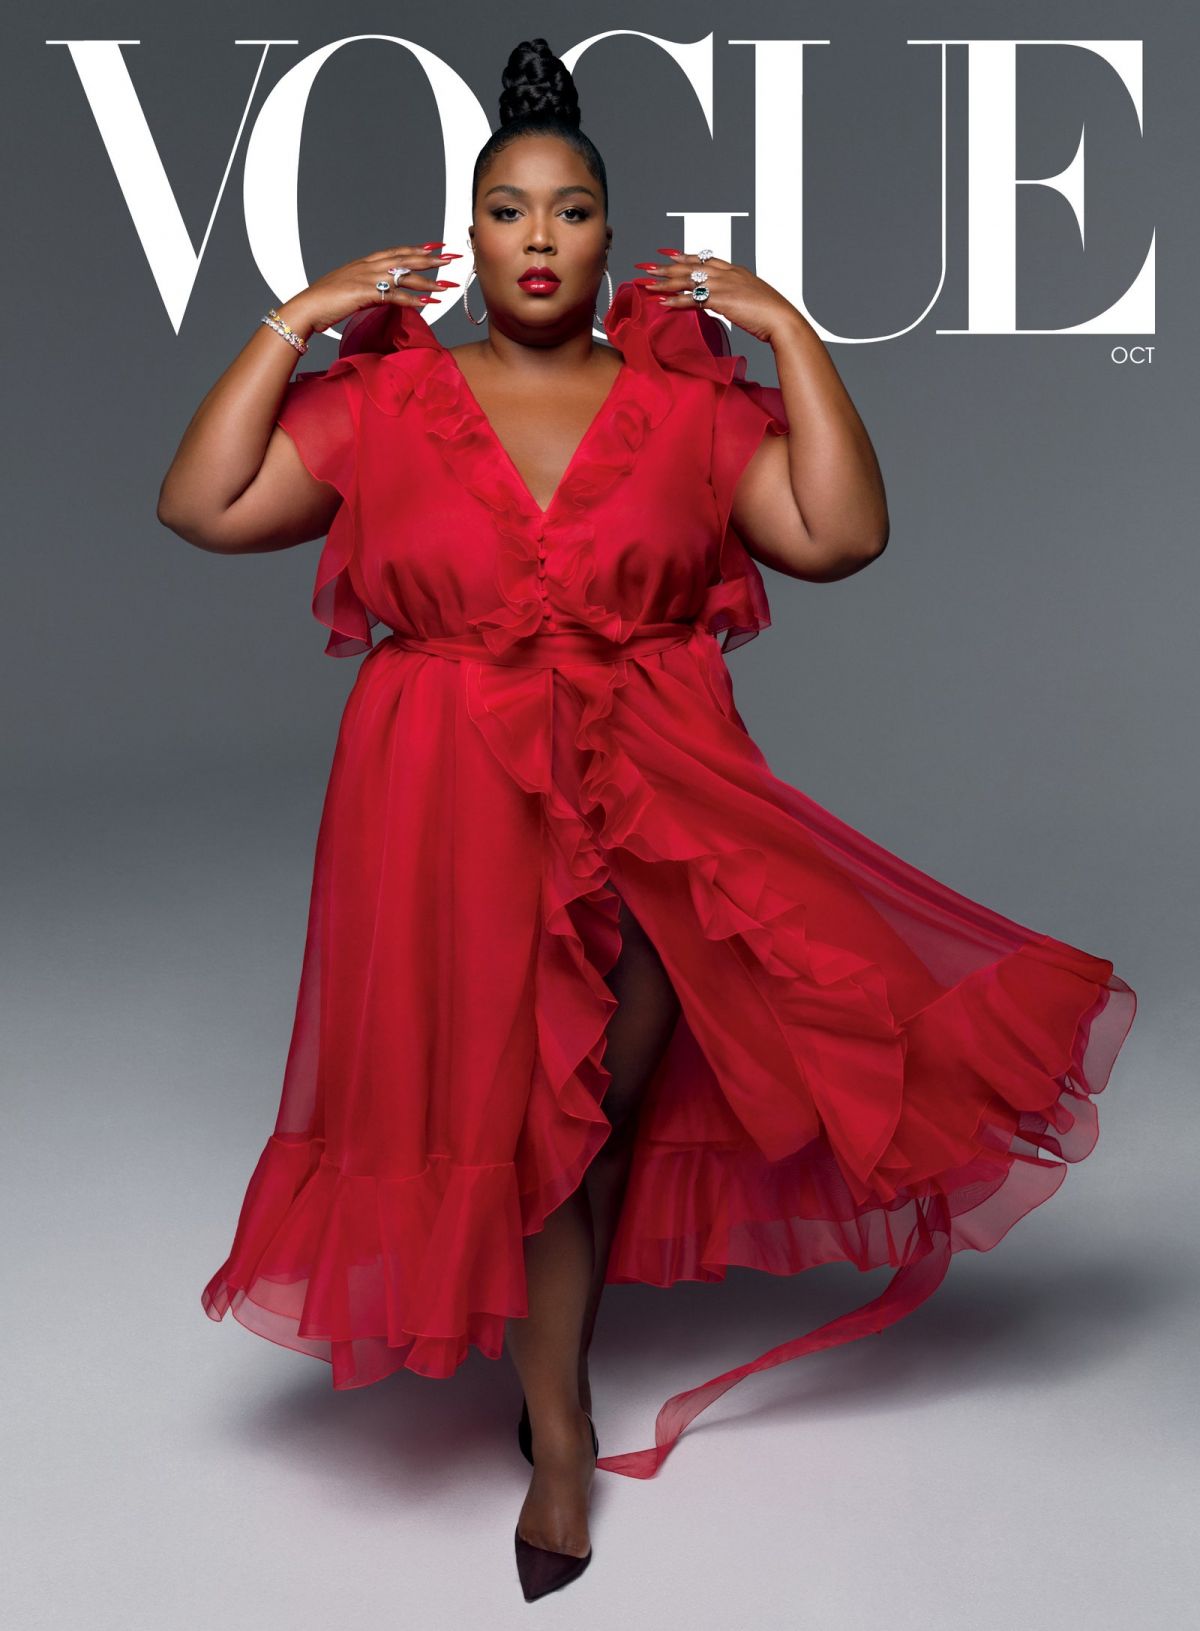 Lizzo Graces the Cover of Vogue